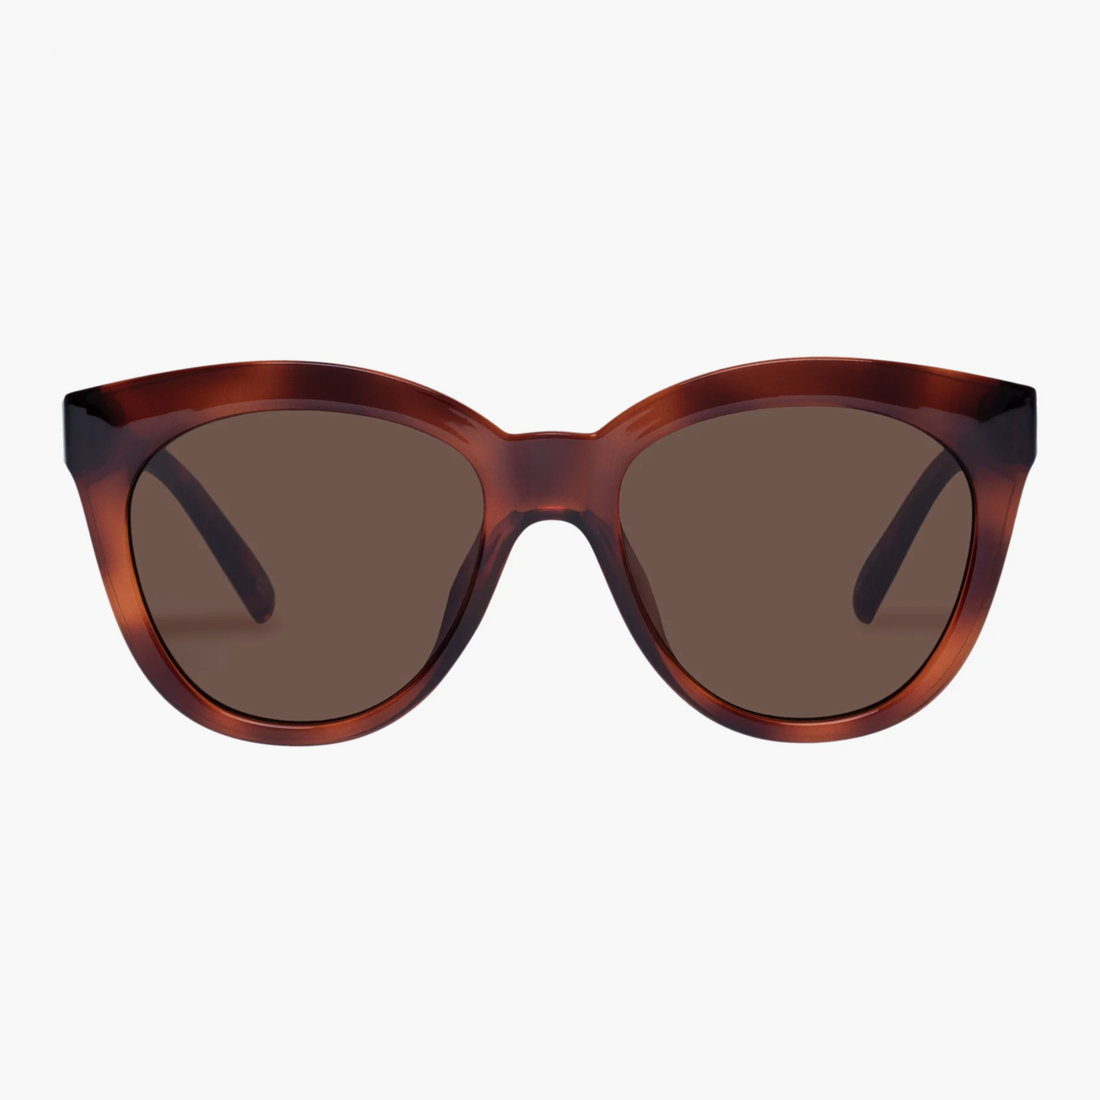 Le Specs RESUMPTION Cat-Eye Recycled Sunglasses - TOFFEE Tortoise